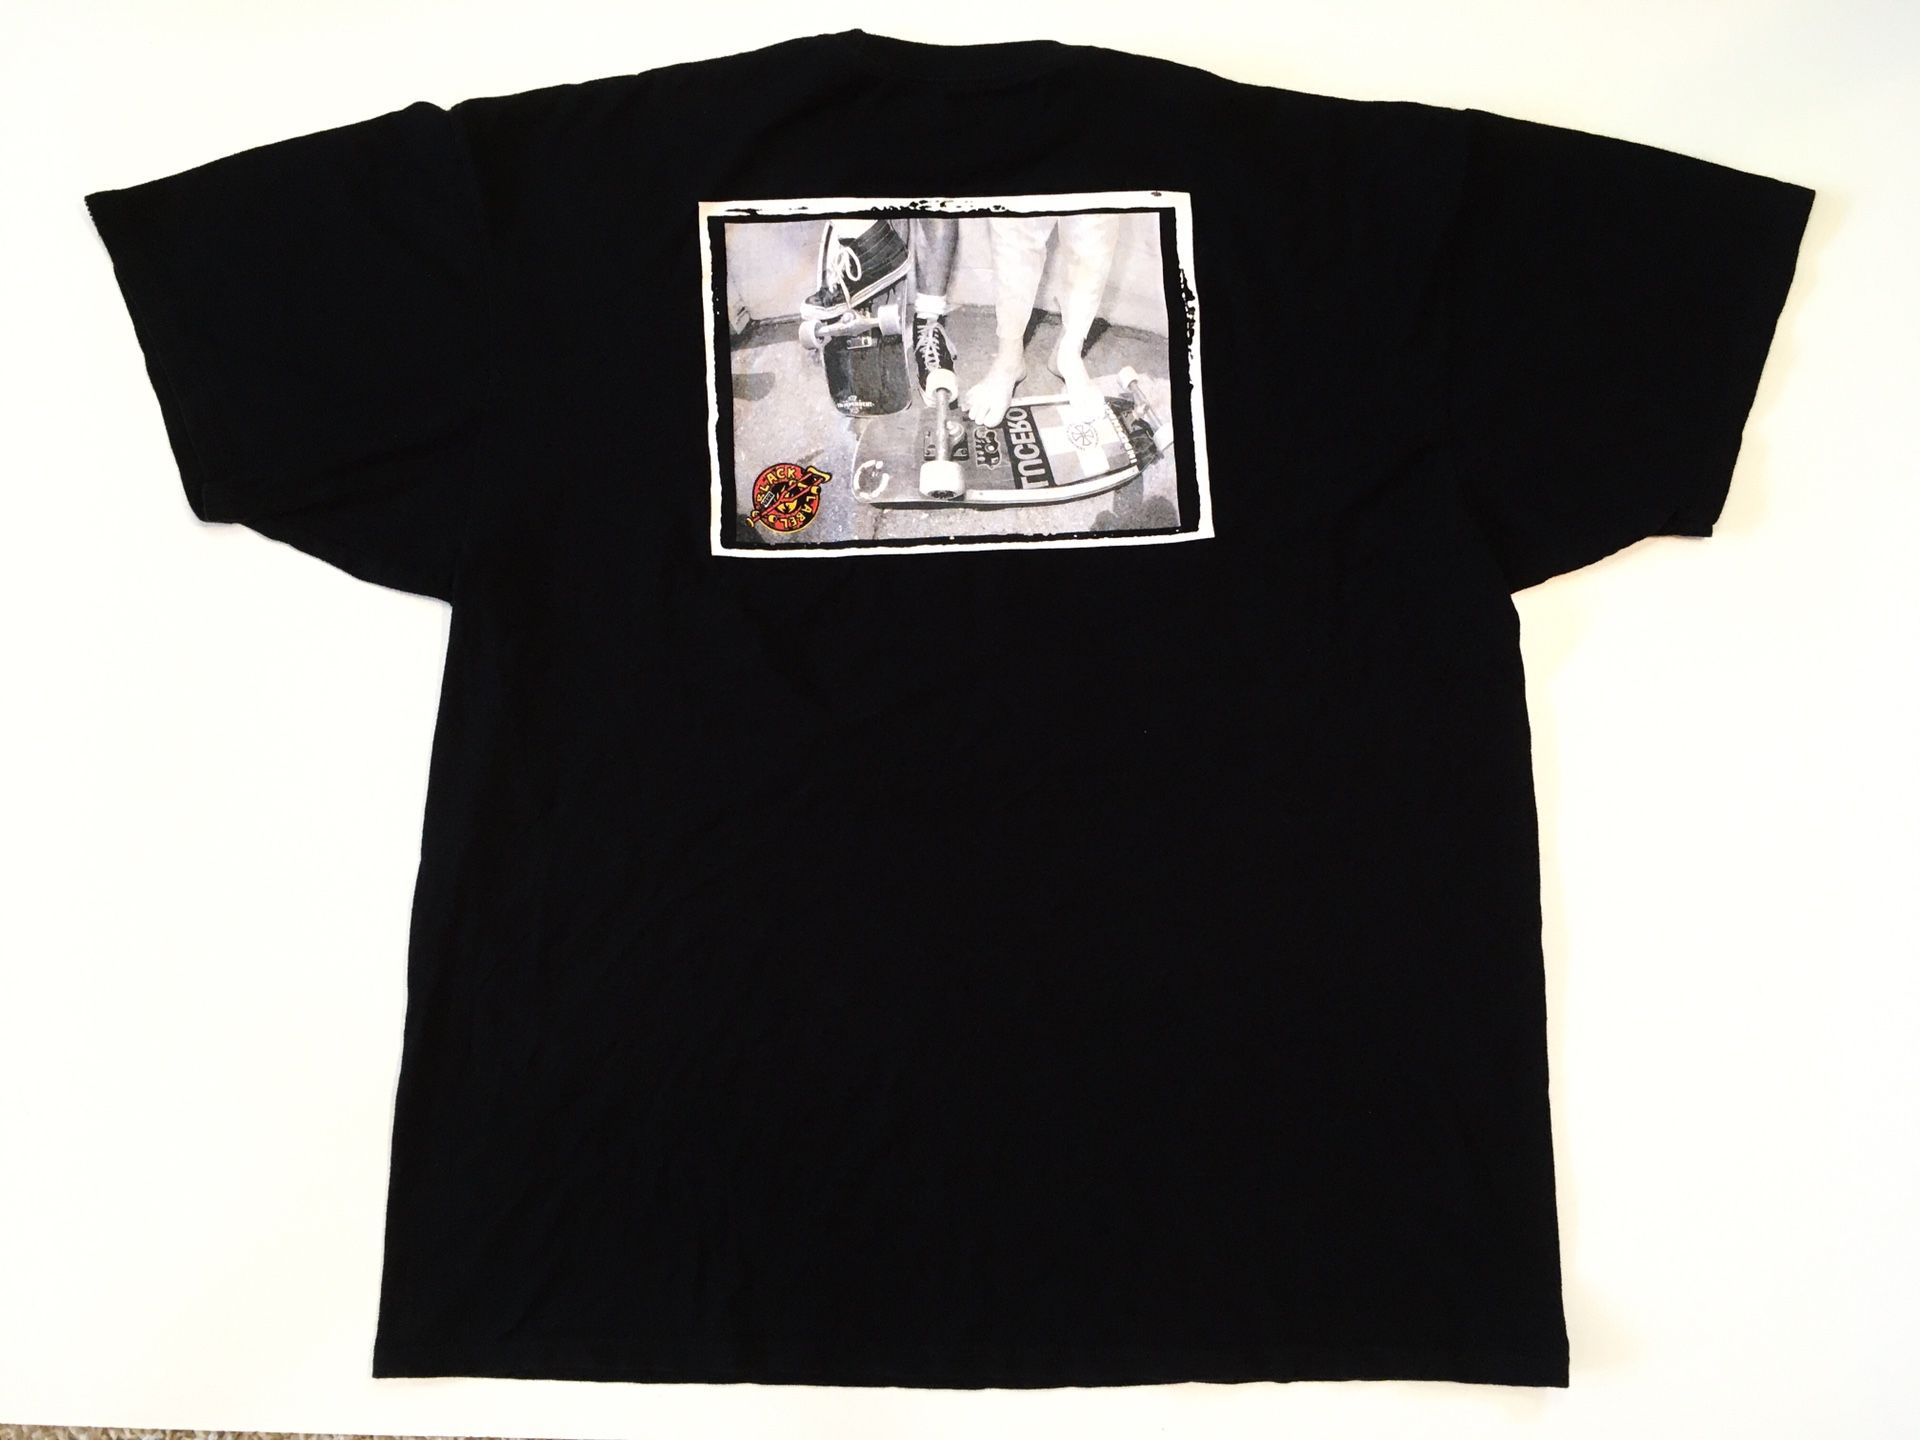 VANS X BLACK LABEL Feet Foot Skateboard Graphic Tee Classic T shirt Size XXL / Extra Extra Large